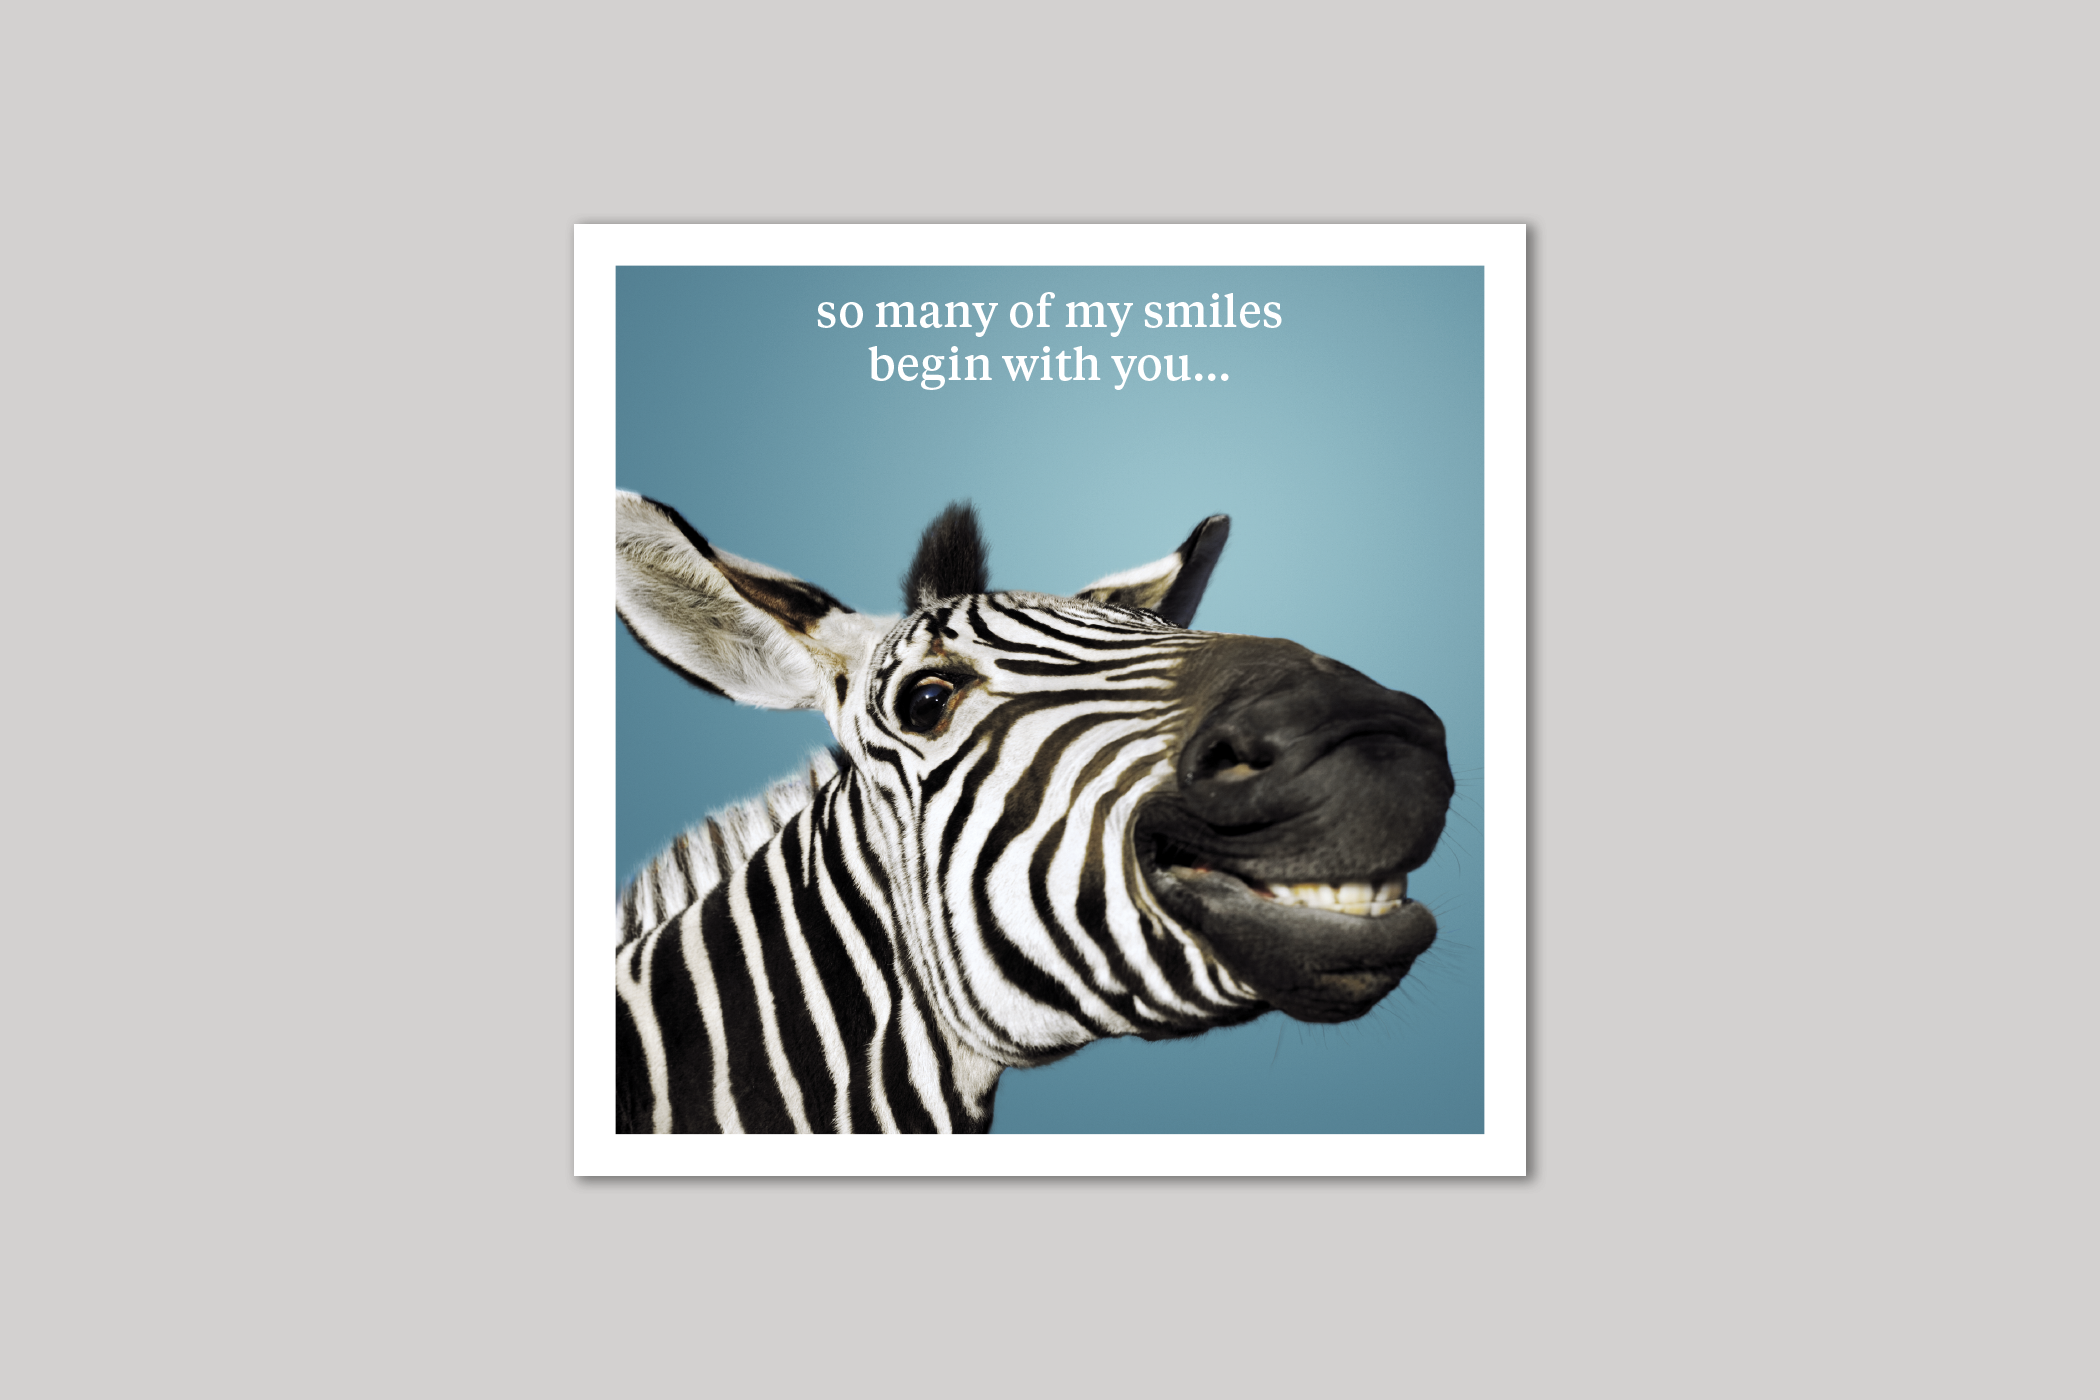 My Smiles quirky animal portrait from Curious World range of greeting cards by Icon.